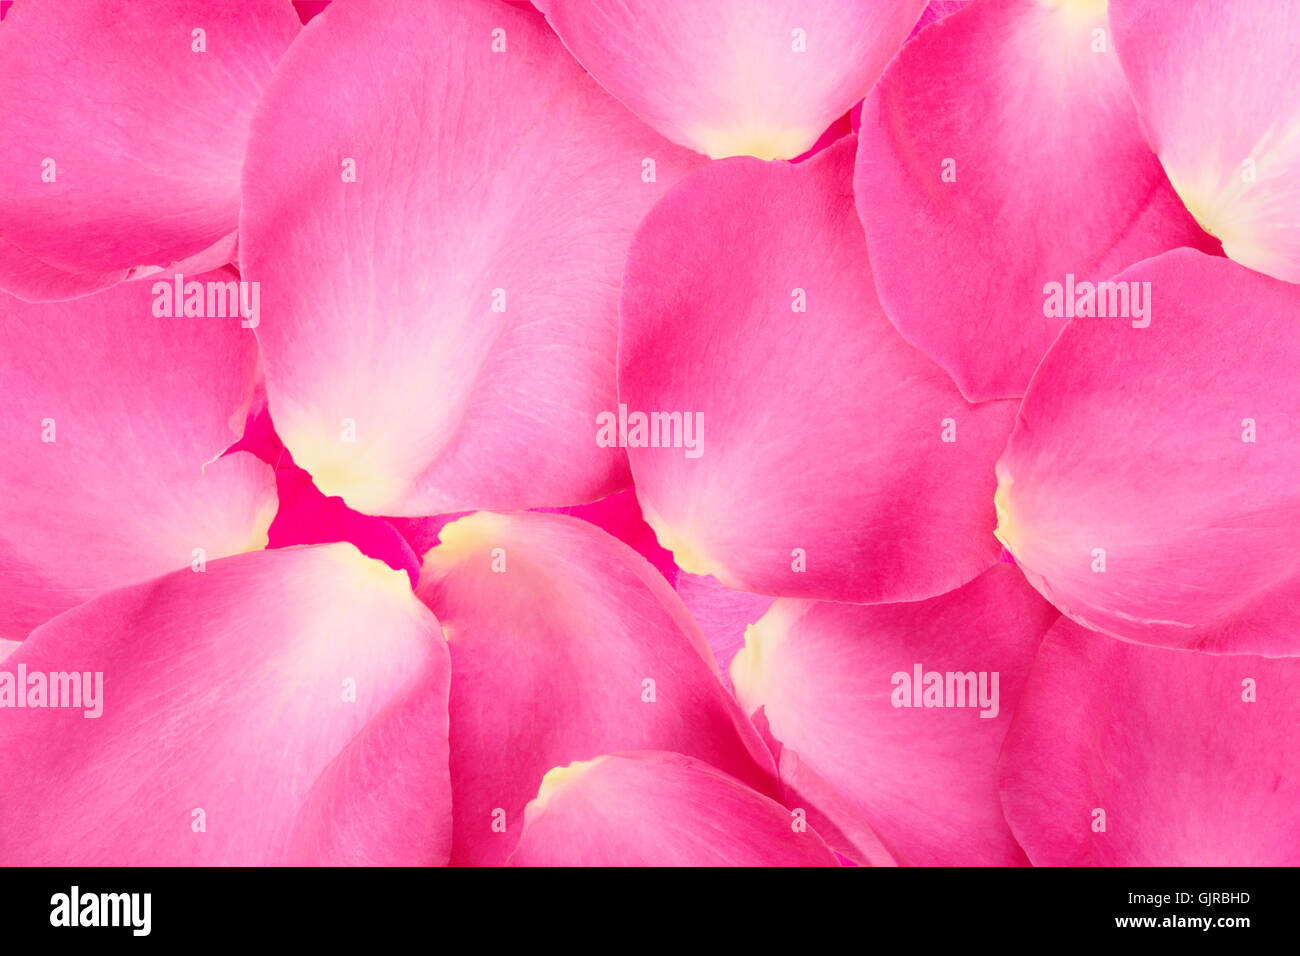 Abstract background of pink rose petals Stock Photo